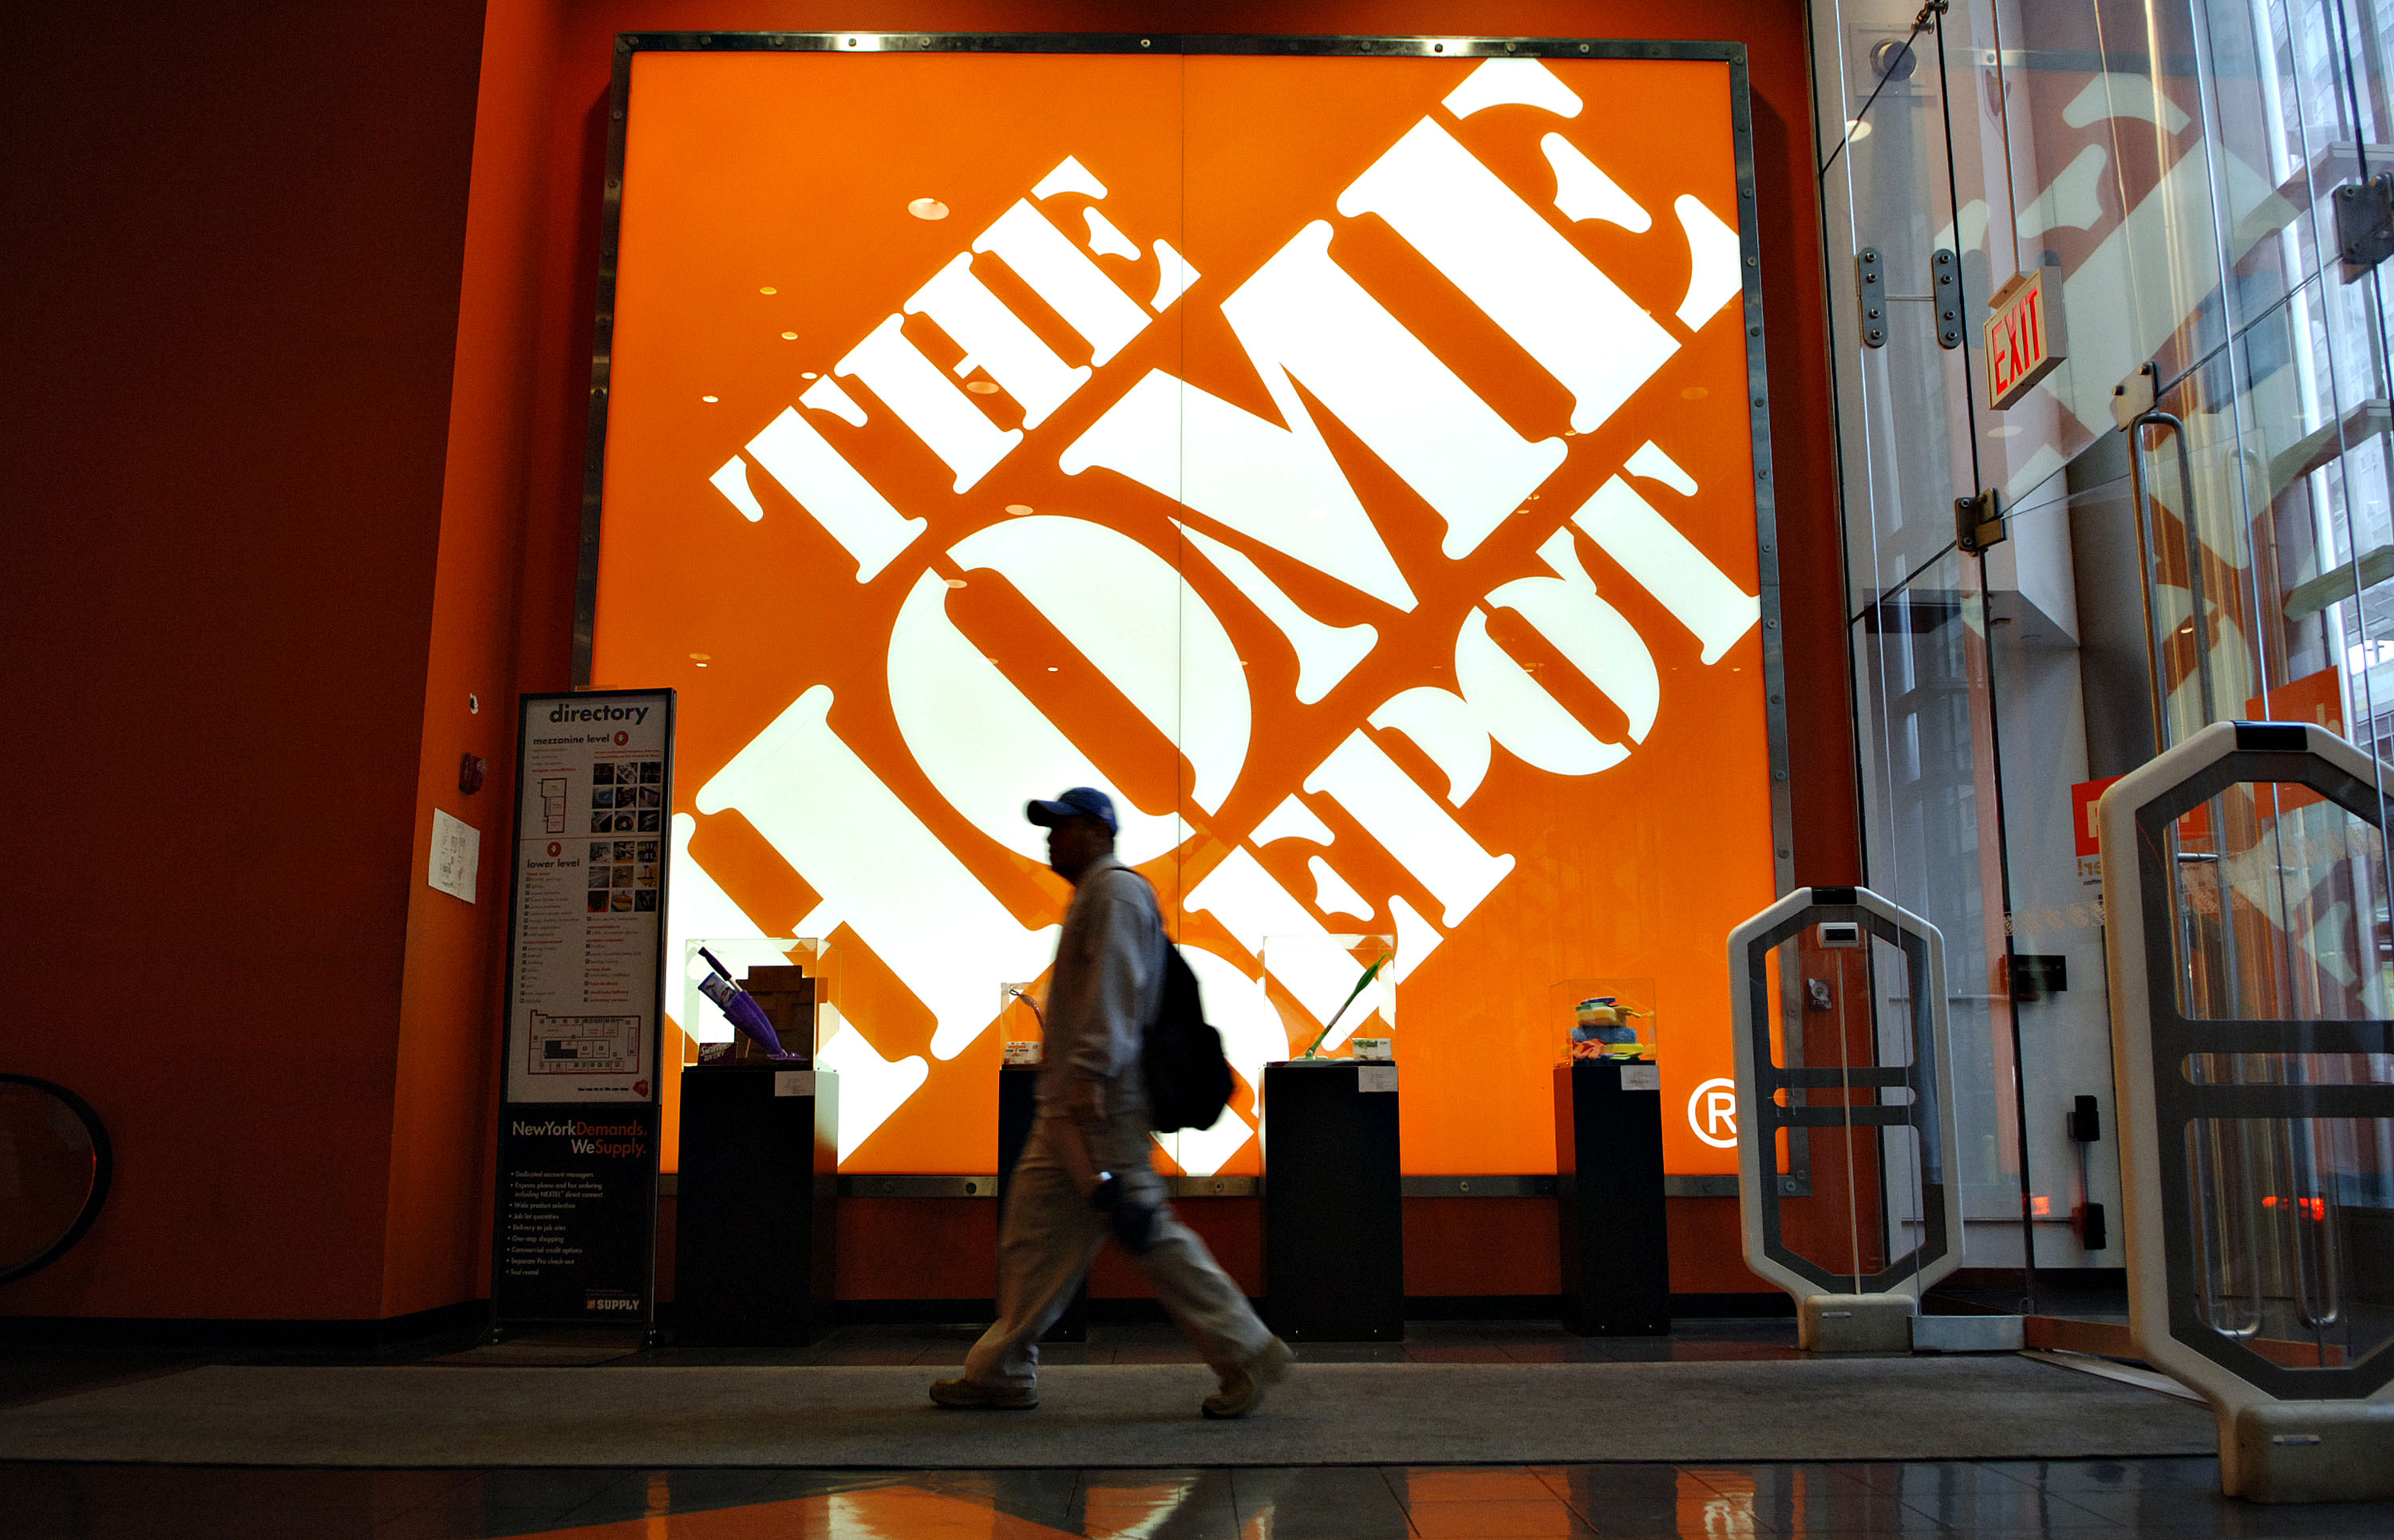 A shopper walks past a large Home Depot logo inside a store in New York on May 16, 2006.